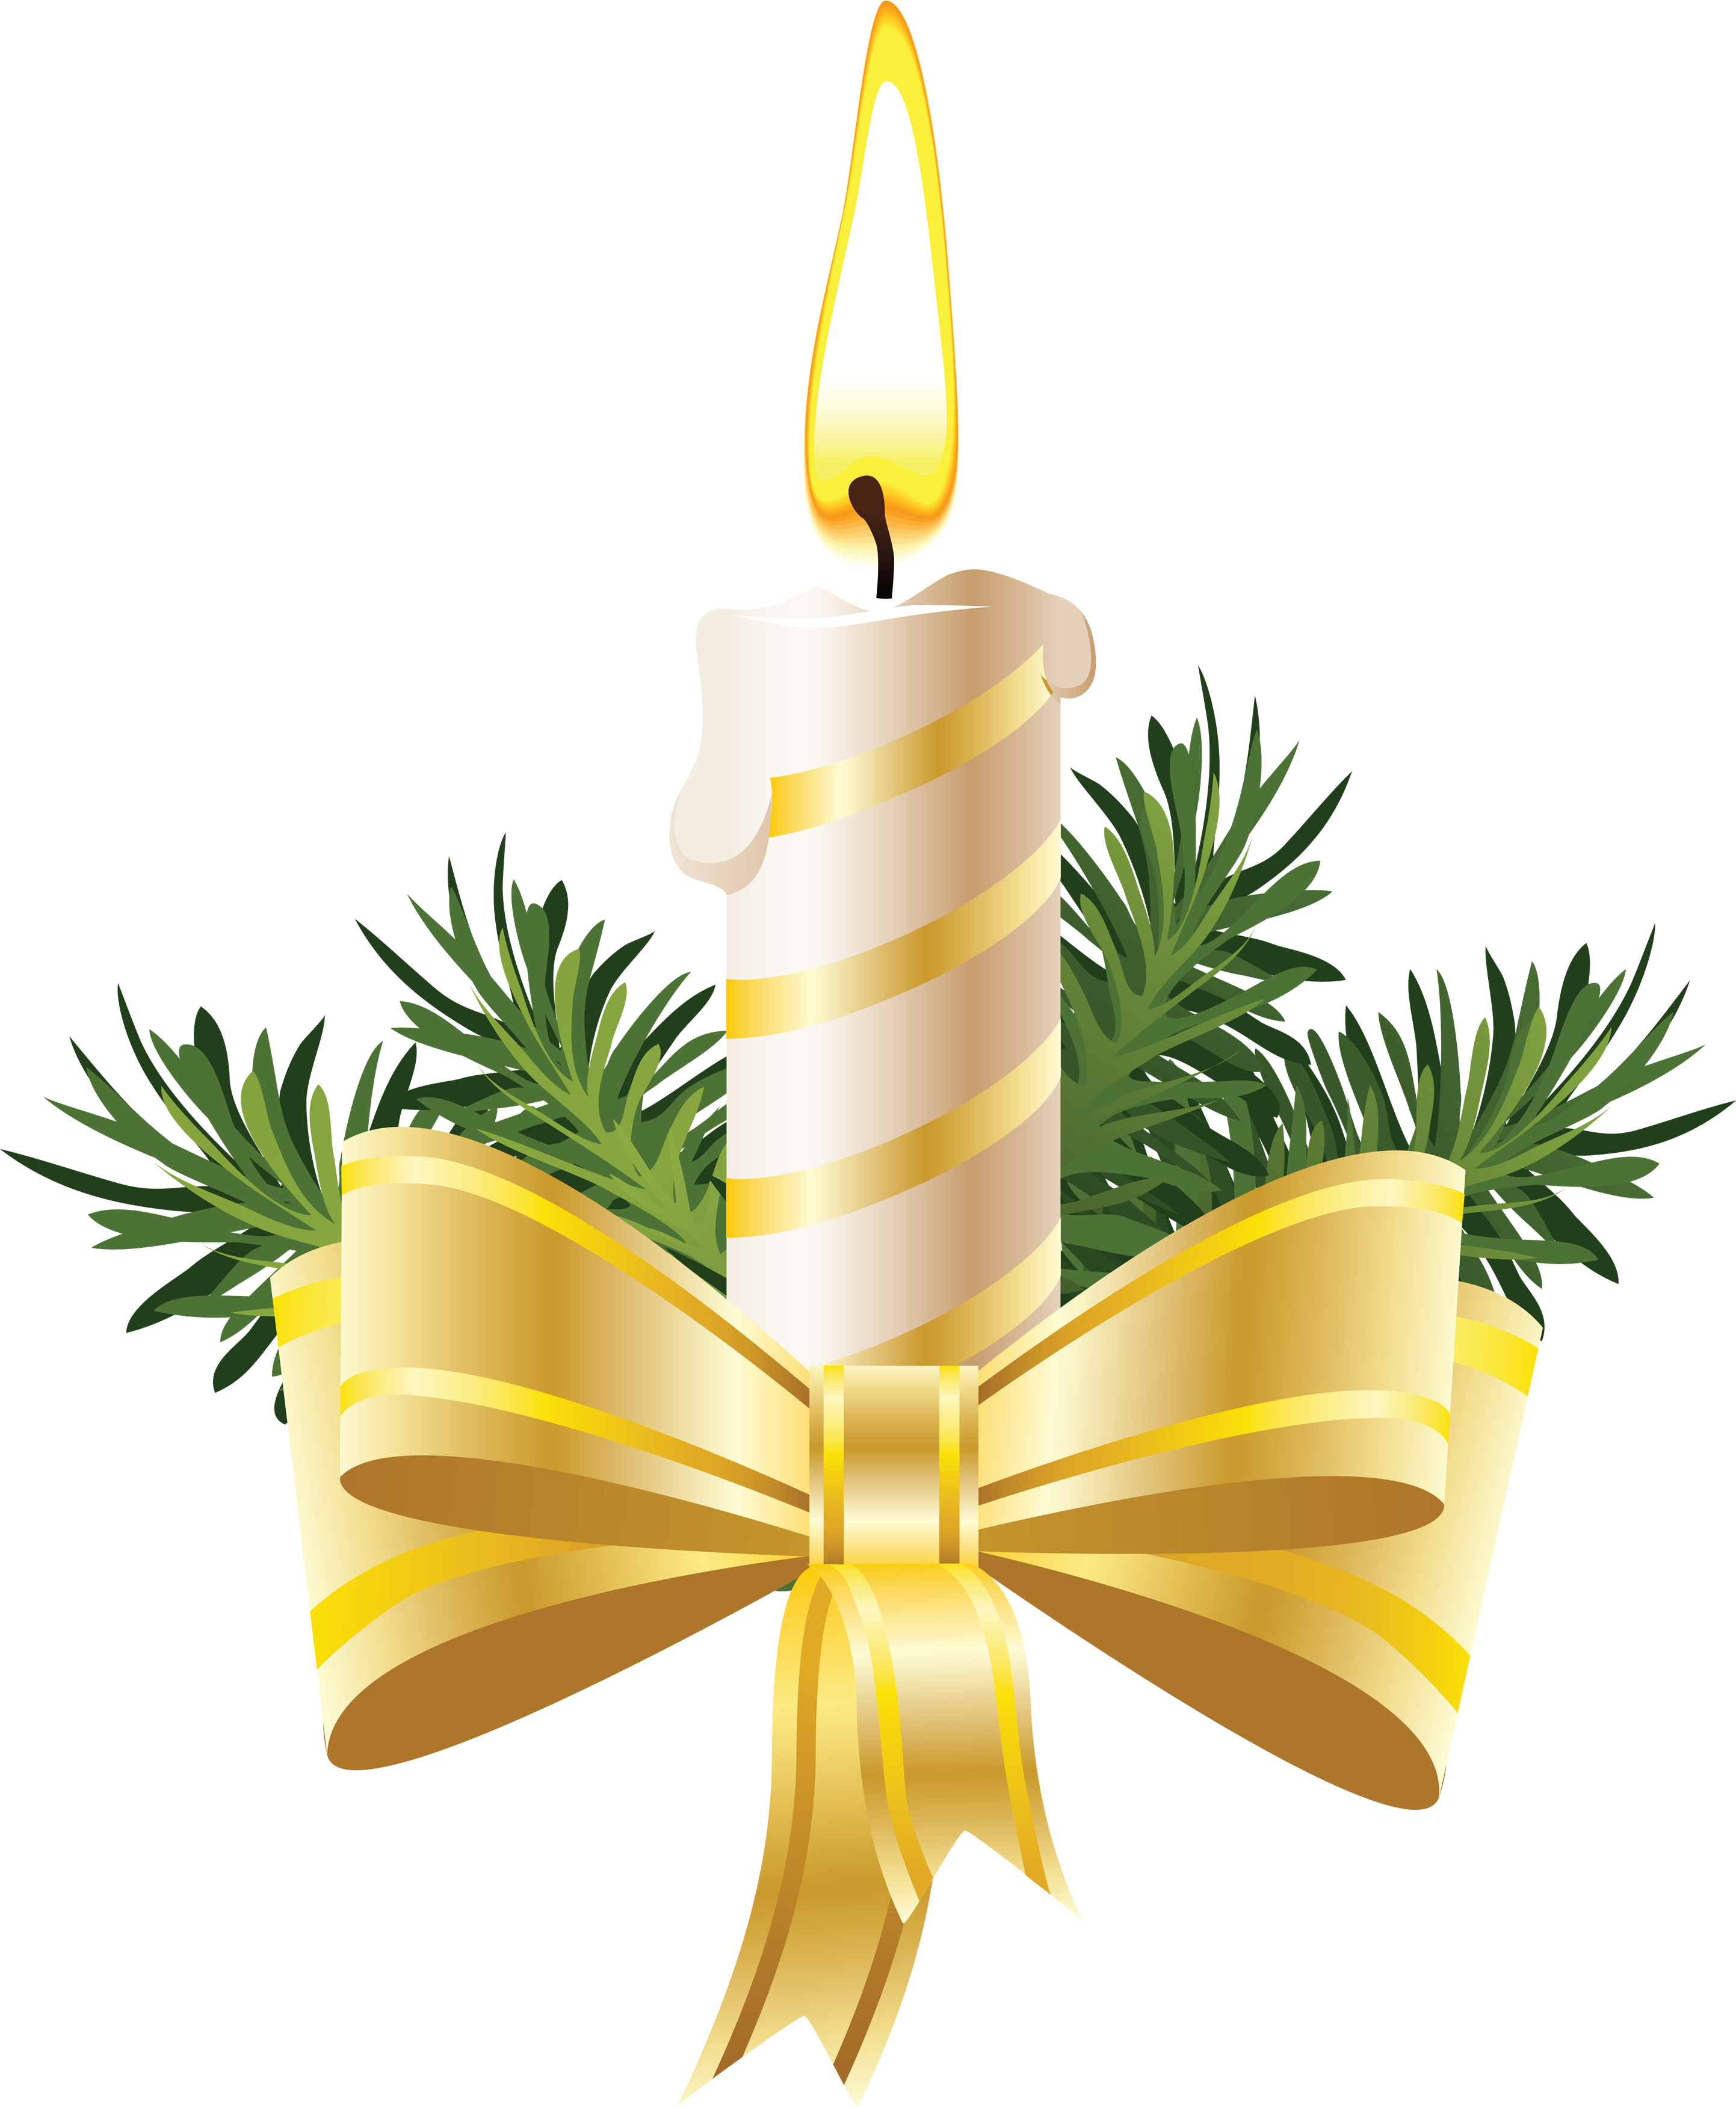 Candle Png Image - Candle, Transparent background PNG HD thumbnail